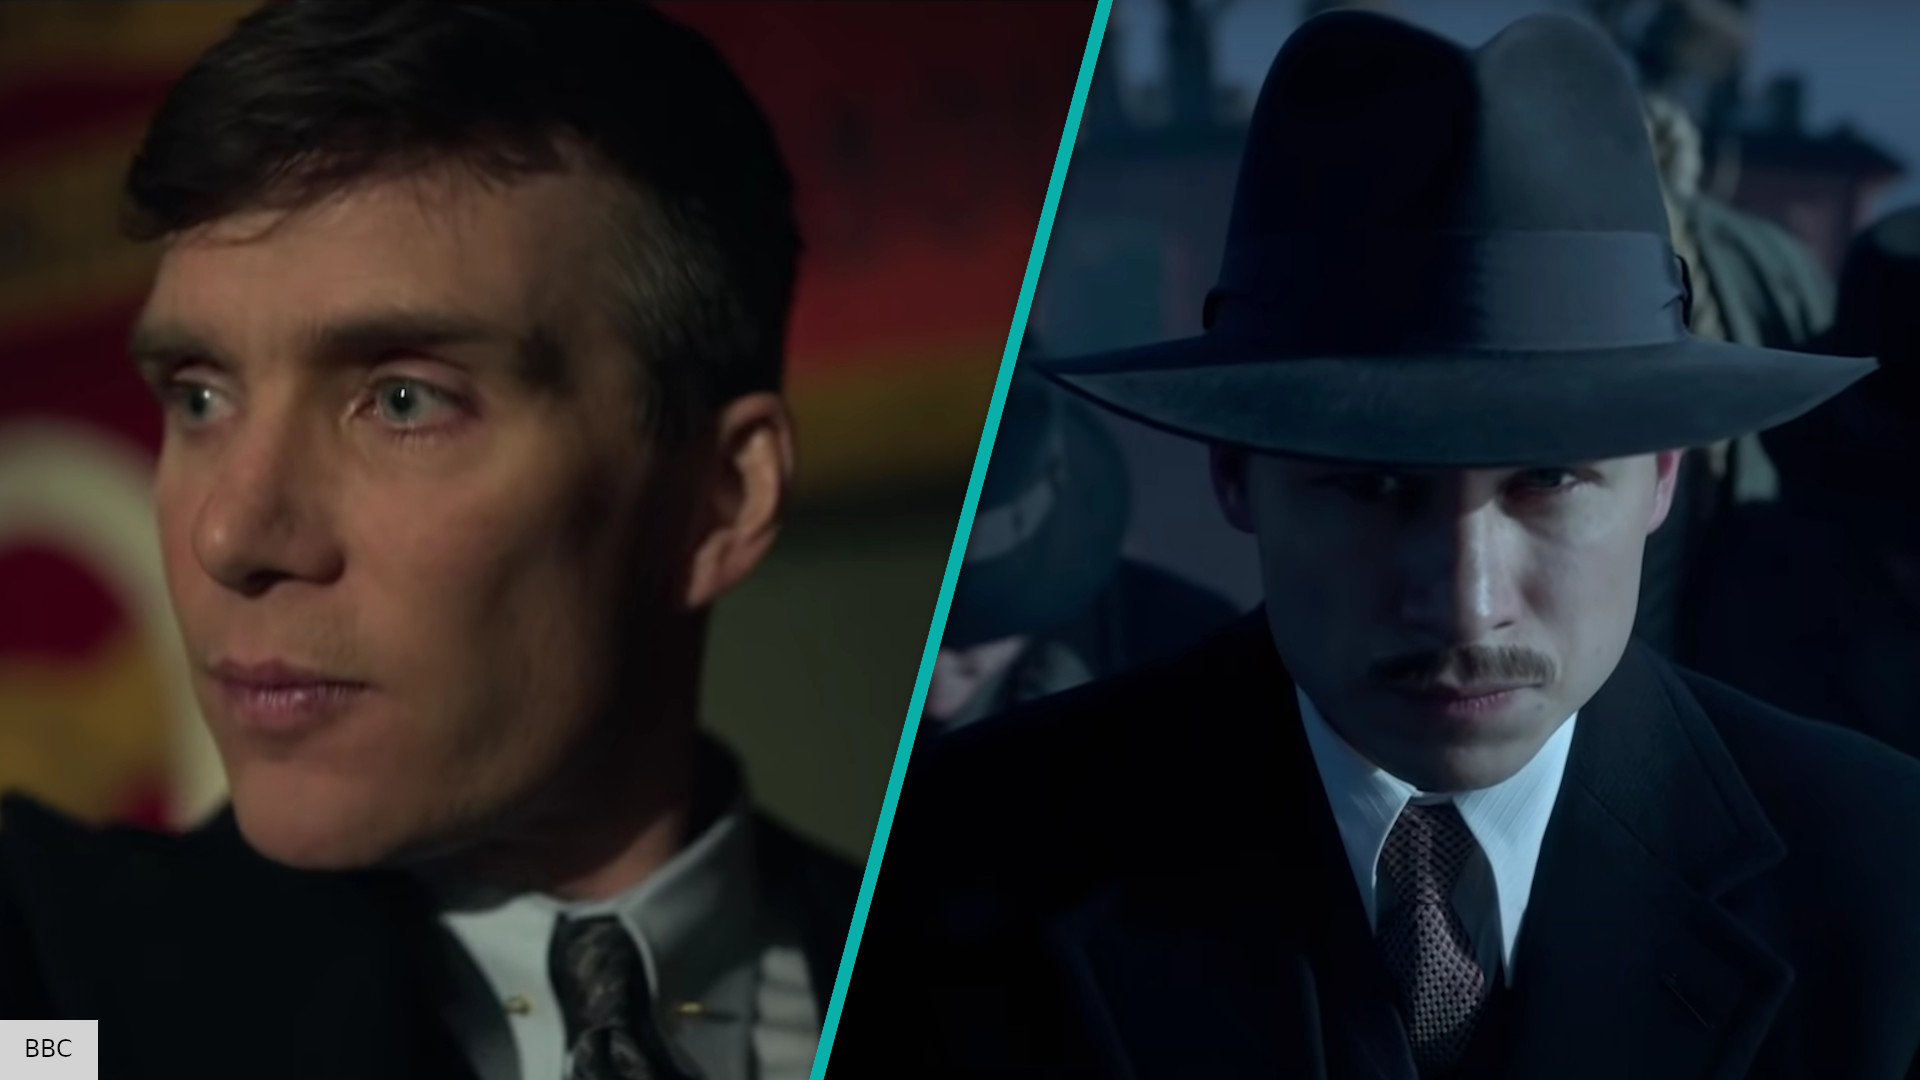 Peaky Blinders Creator Steven Knight Had A Very Personal Goal For